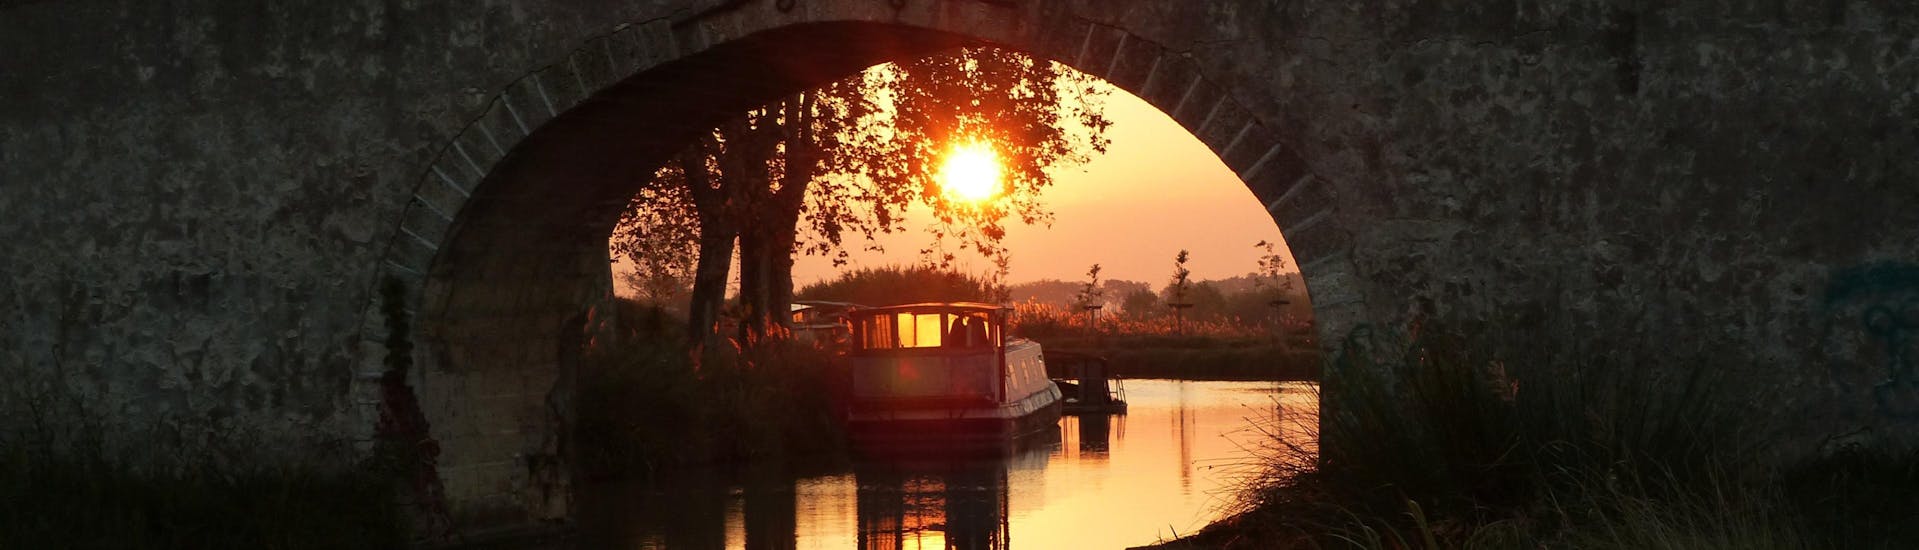 Sunrise view on a canal du midi bridge with Exclusive Cruises France.